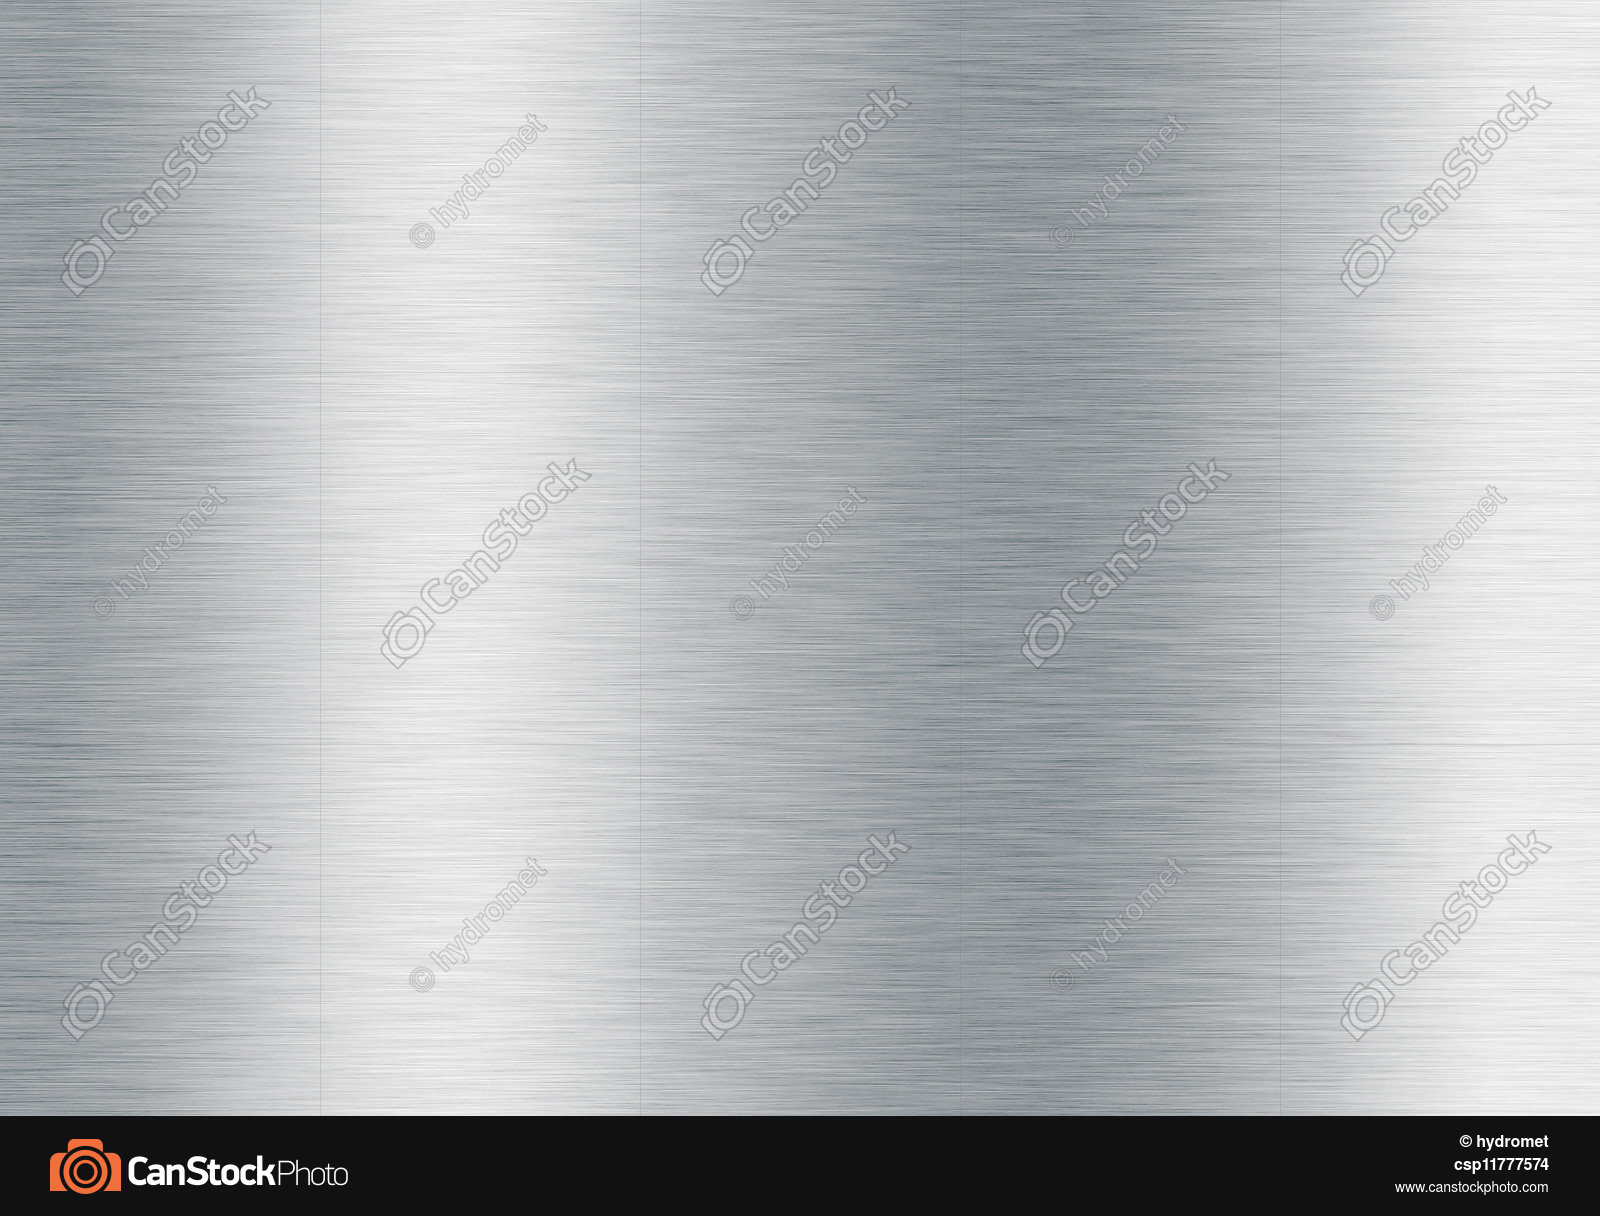 Brushed silver metallic background picture - Search Photo Clipart ...